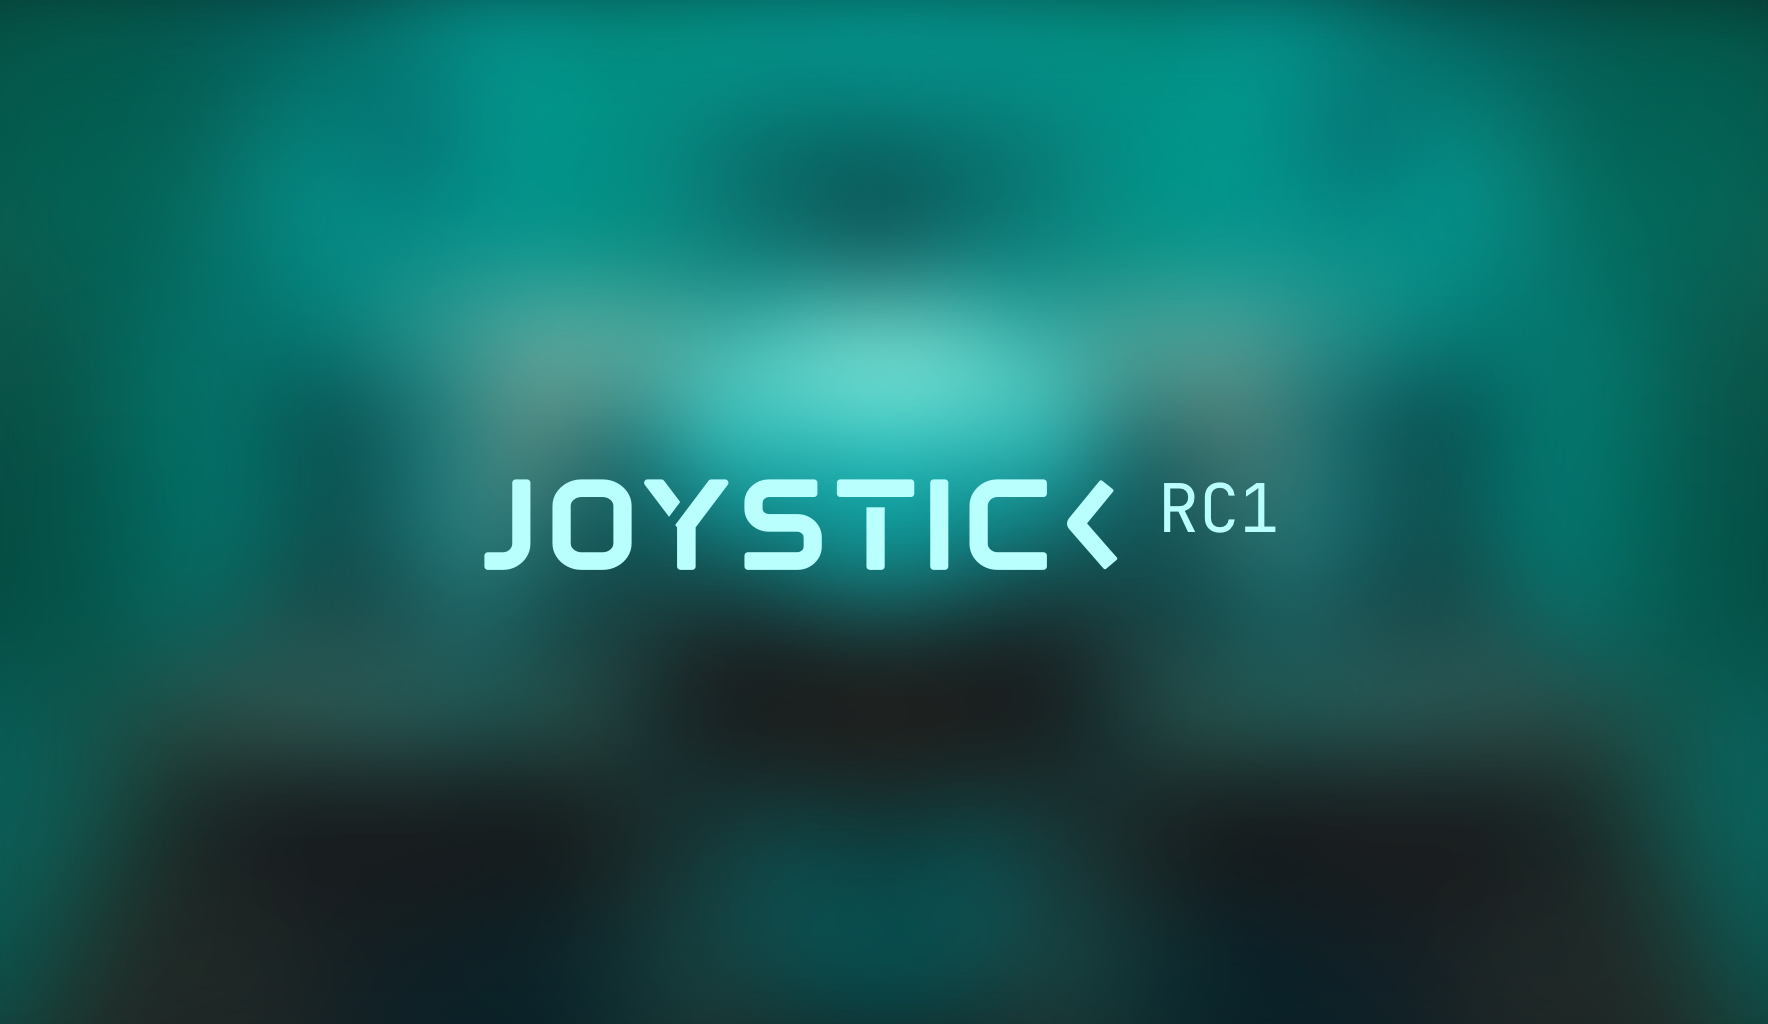 Joystick's CLI automatically starts up your app's databases, HTTP server, and enables HMR for near-instant updates in development. Write CSS as a simp